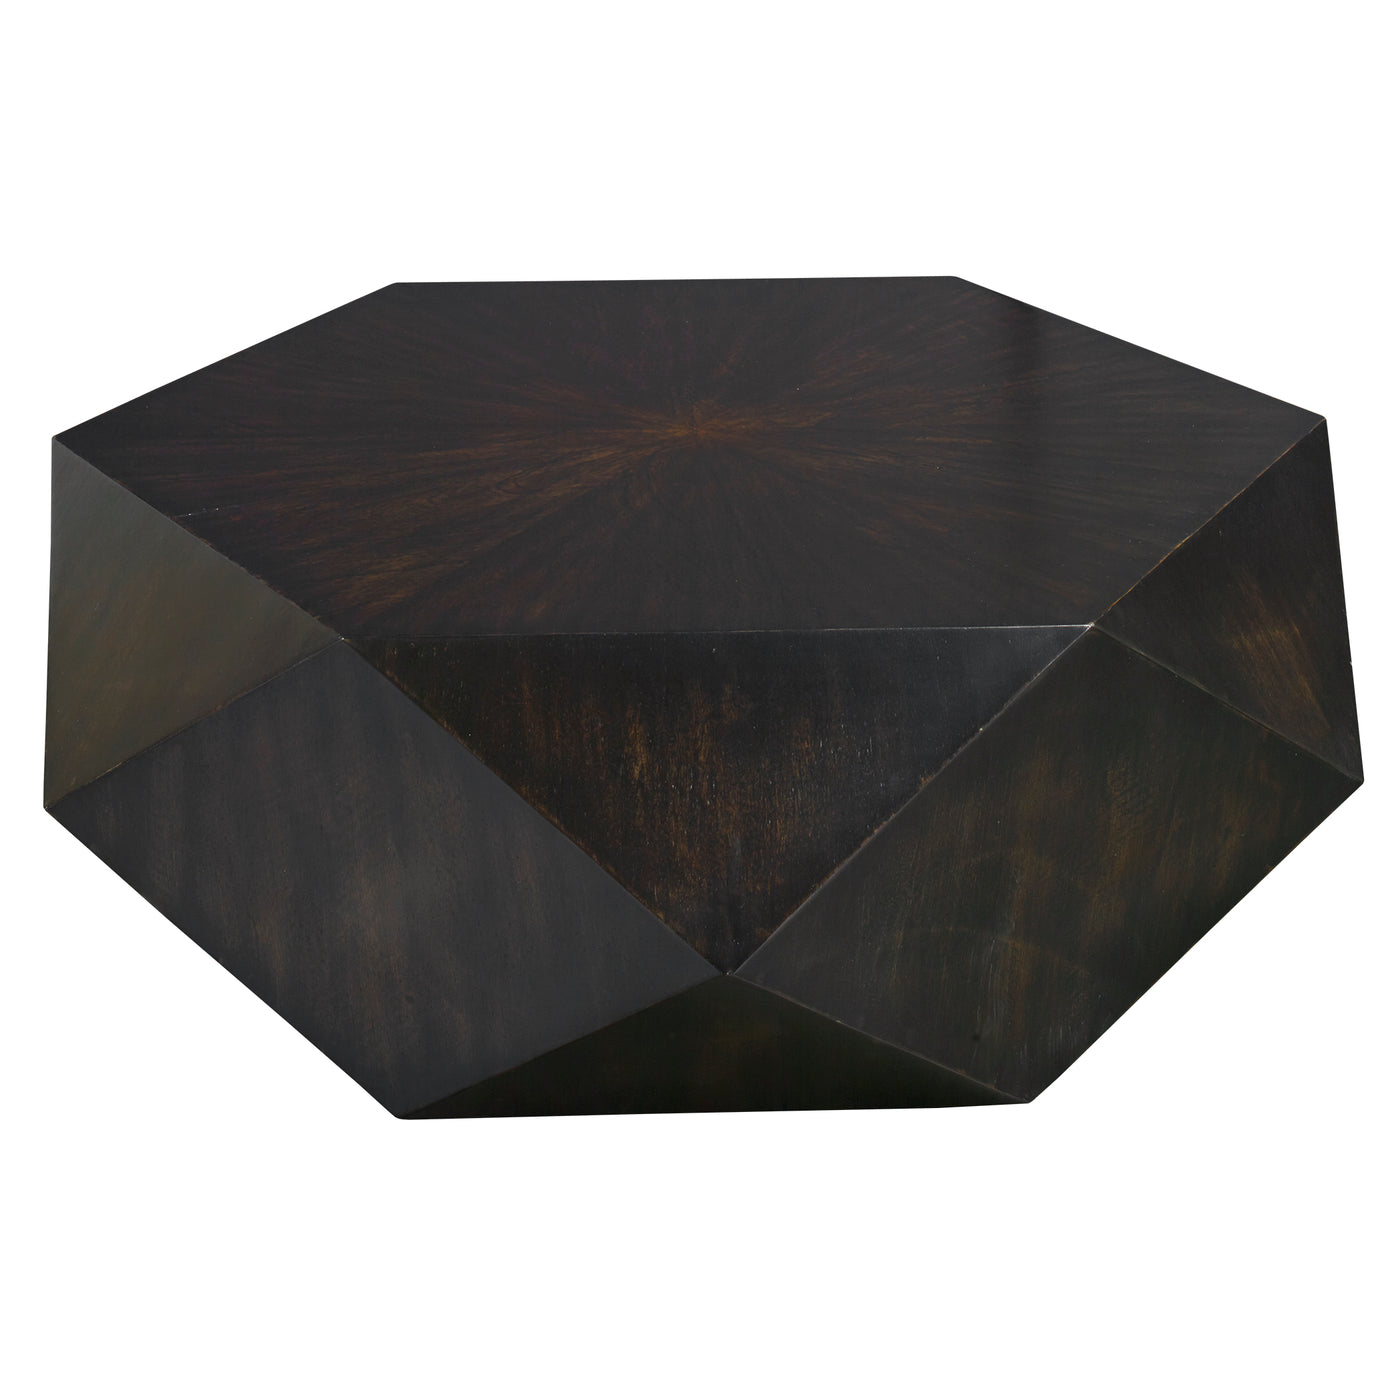 This Unique Geometric Table Features A Low Profile, Perfect For Viewing The Sunburst Top In Mango Veneer With A Worn Black...